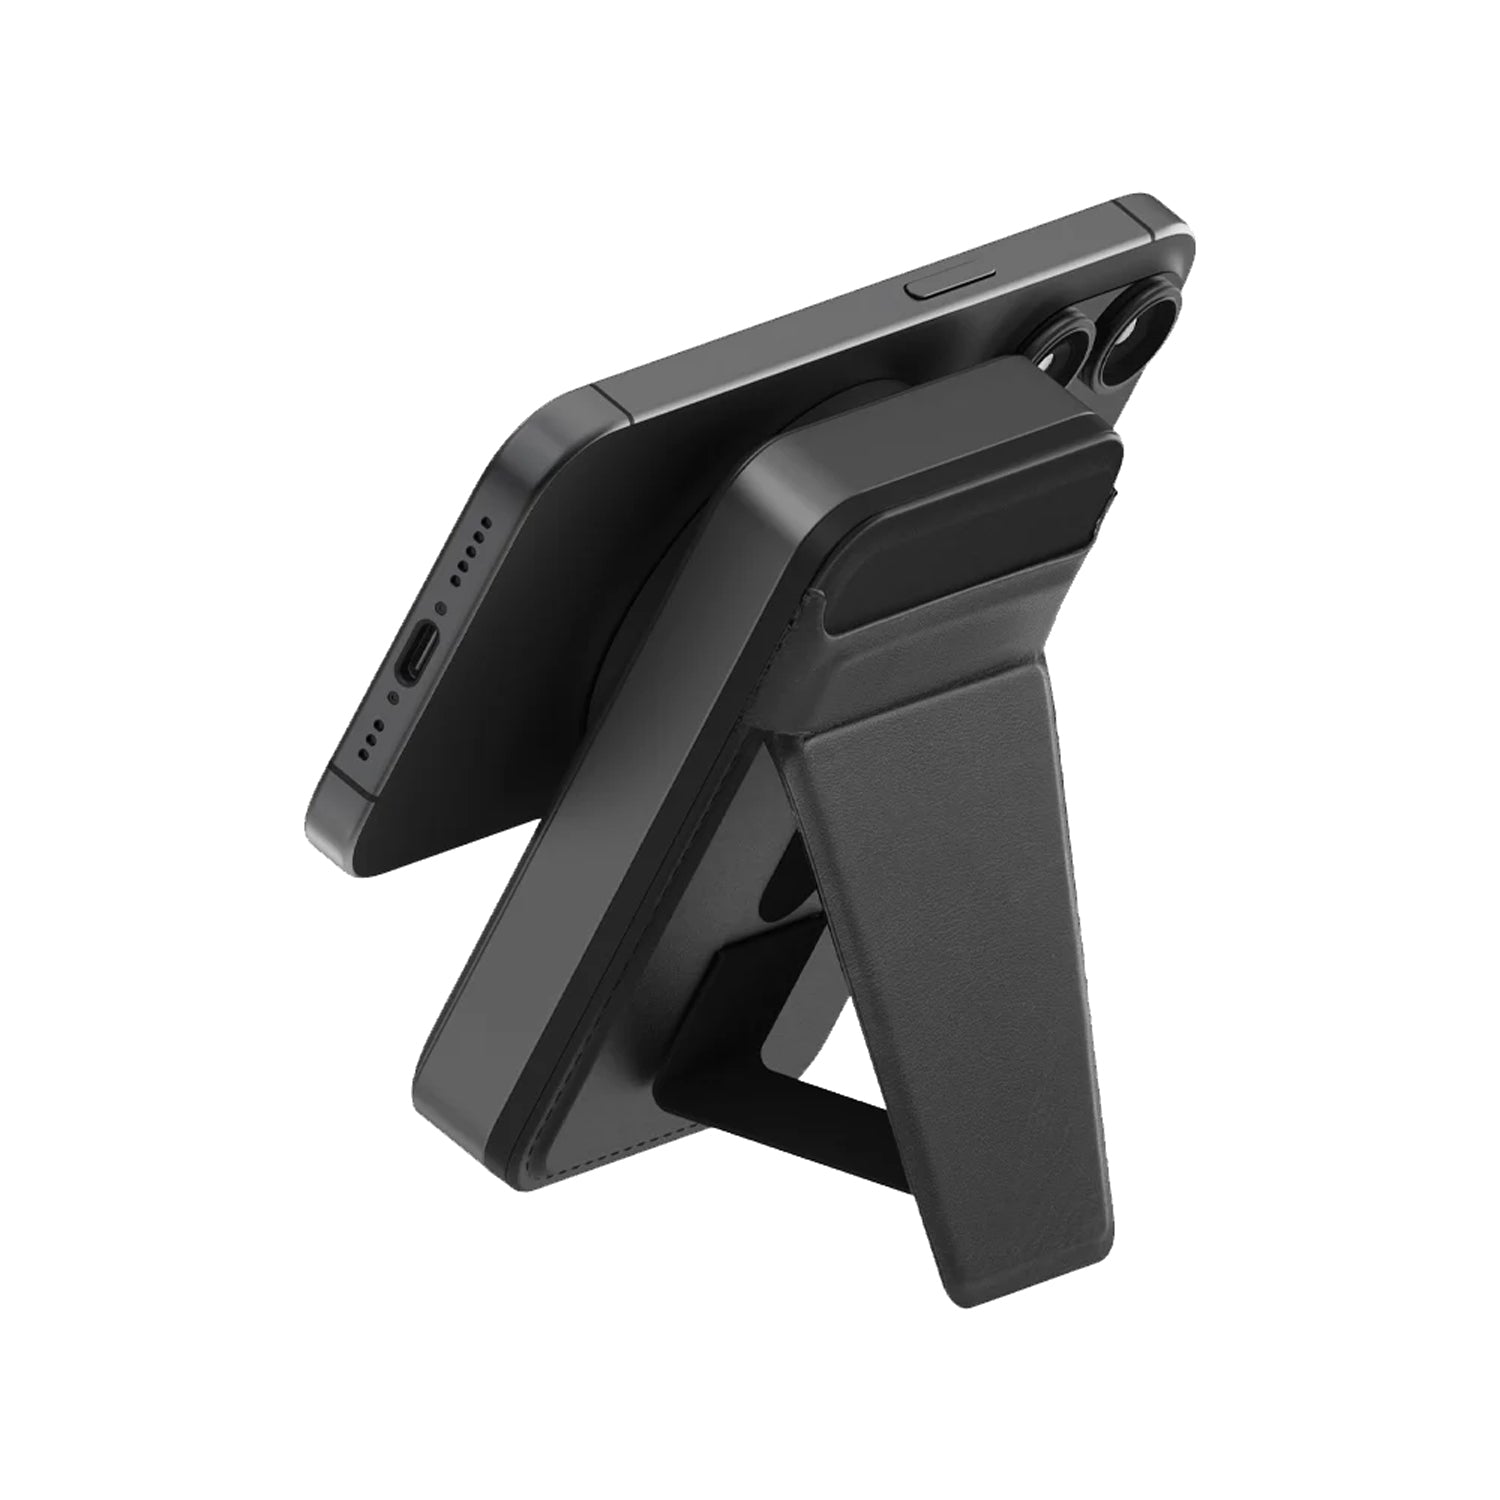 Energea MagWallet MagSafe Card Holder with Built-In Stand & Up to 15W Wireless Charging